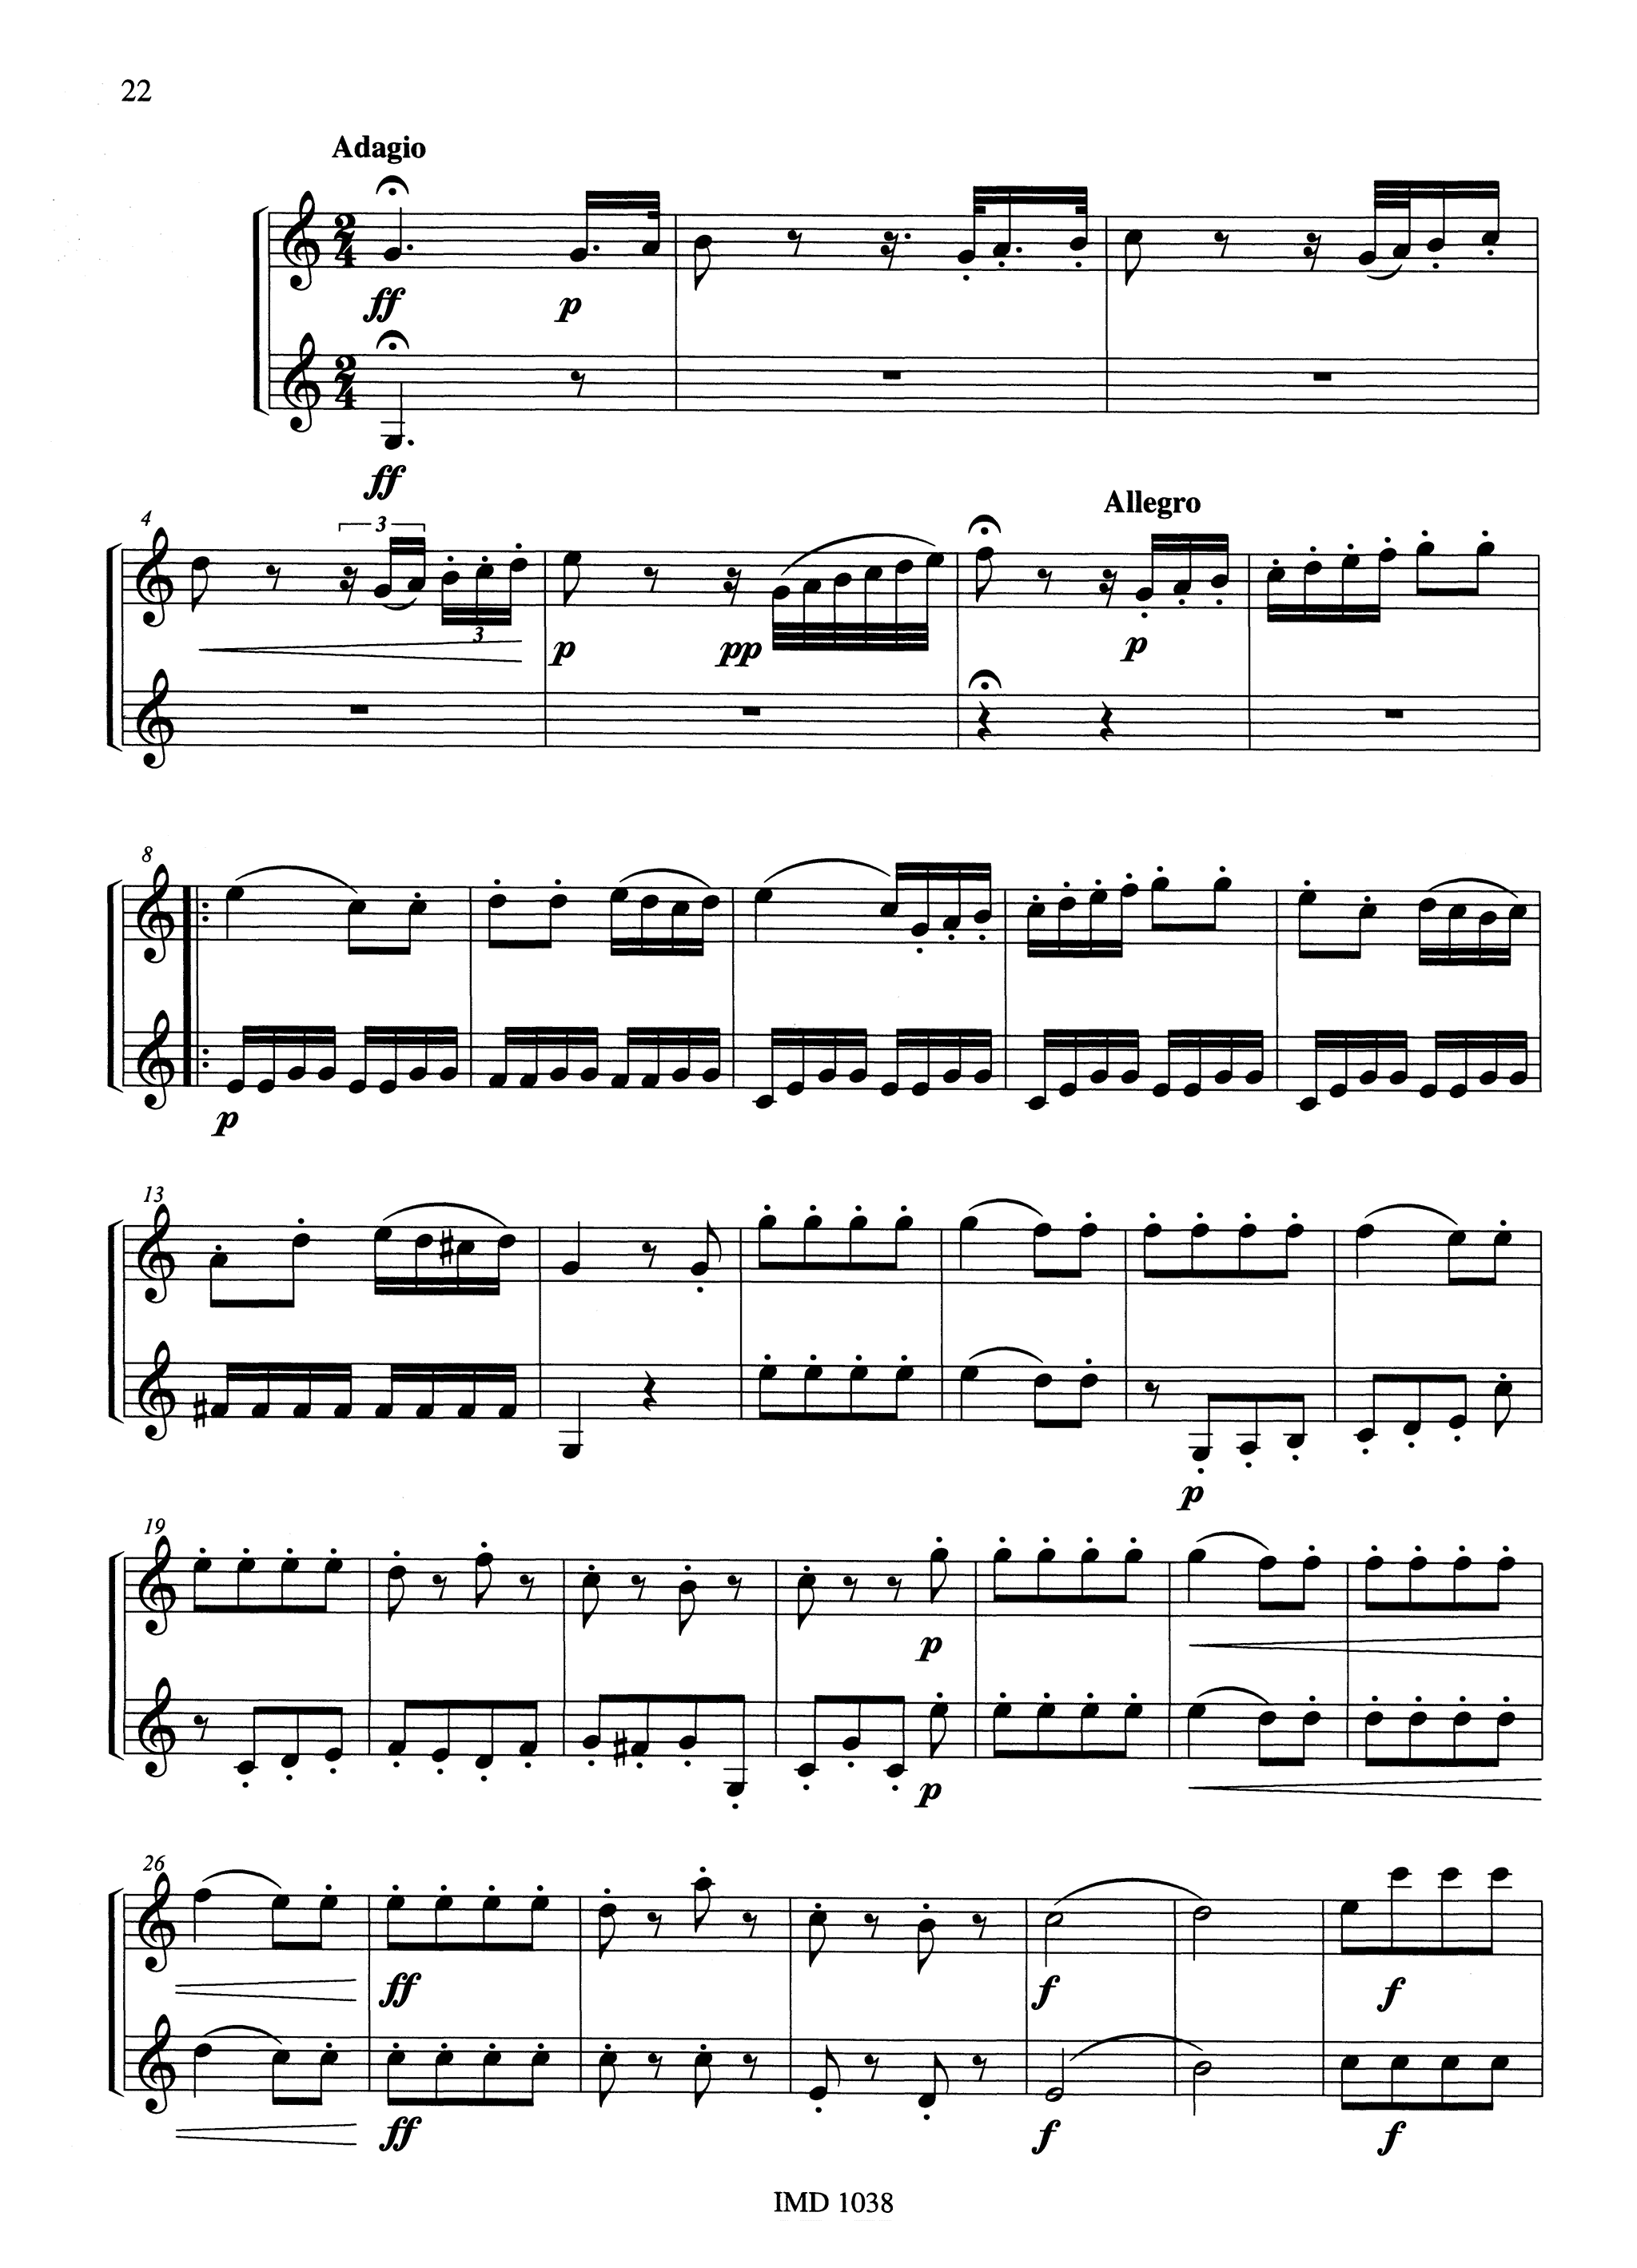 Symphony No. 1, Op. 21 for clarinet duet - Movement 4